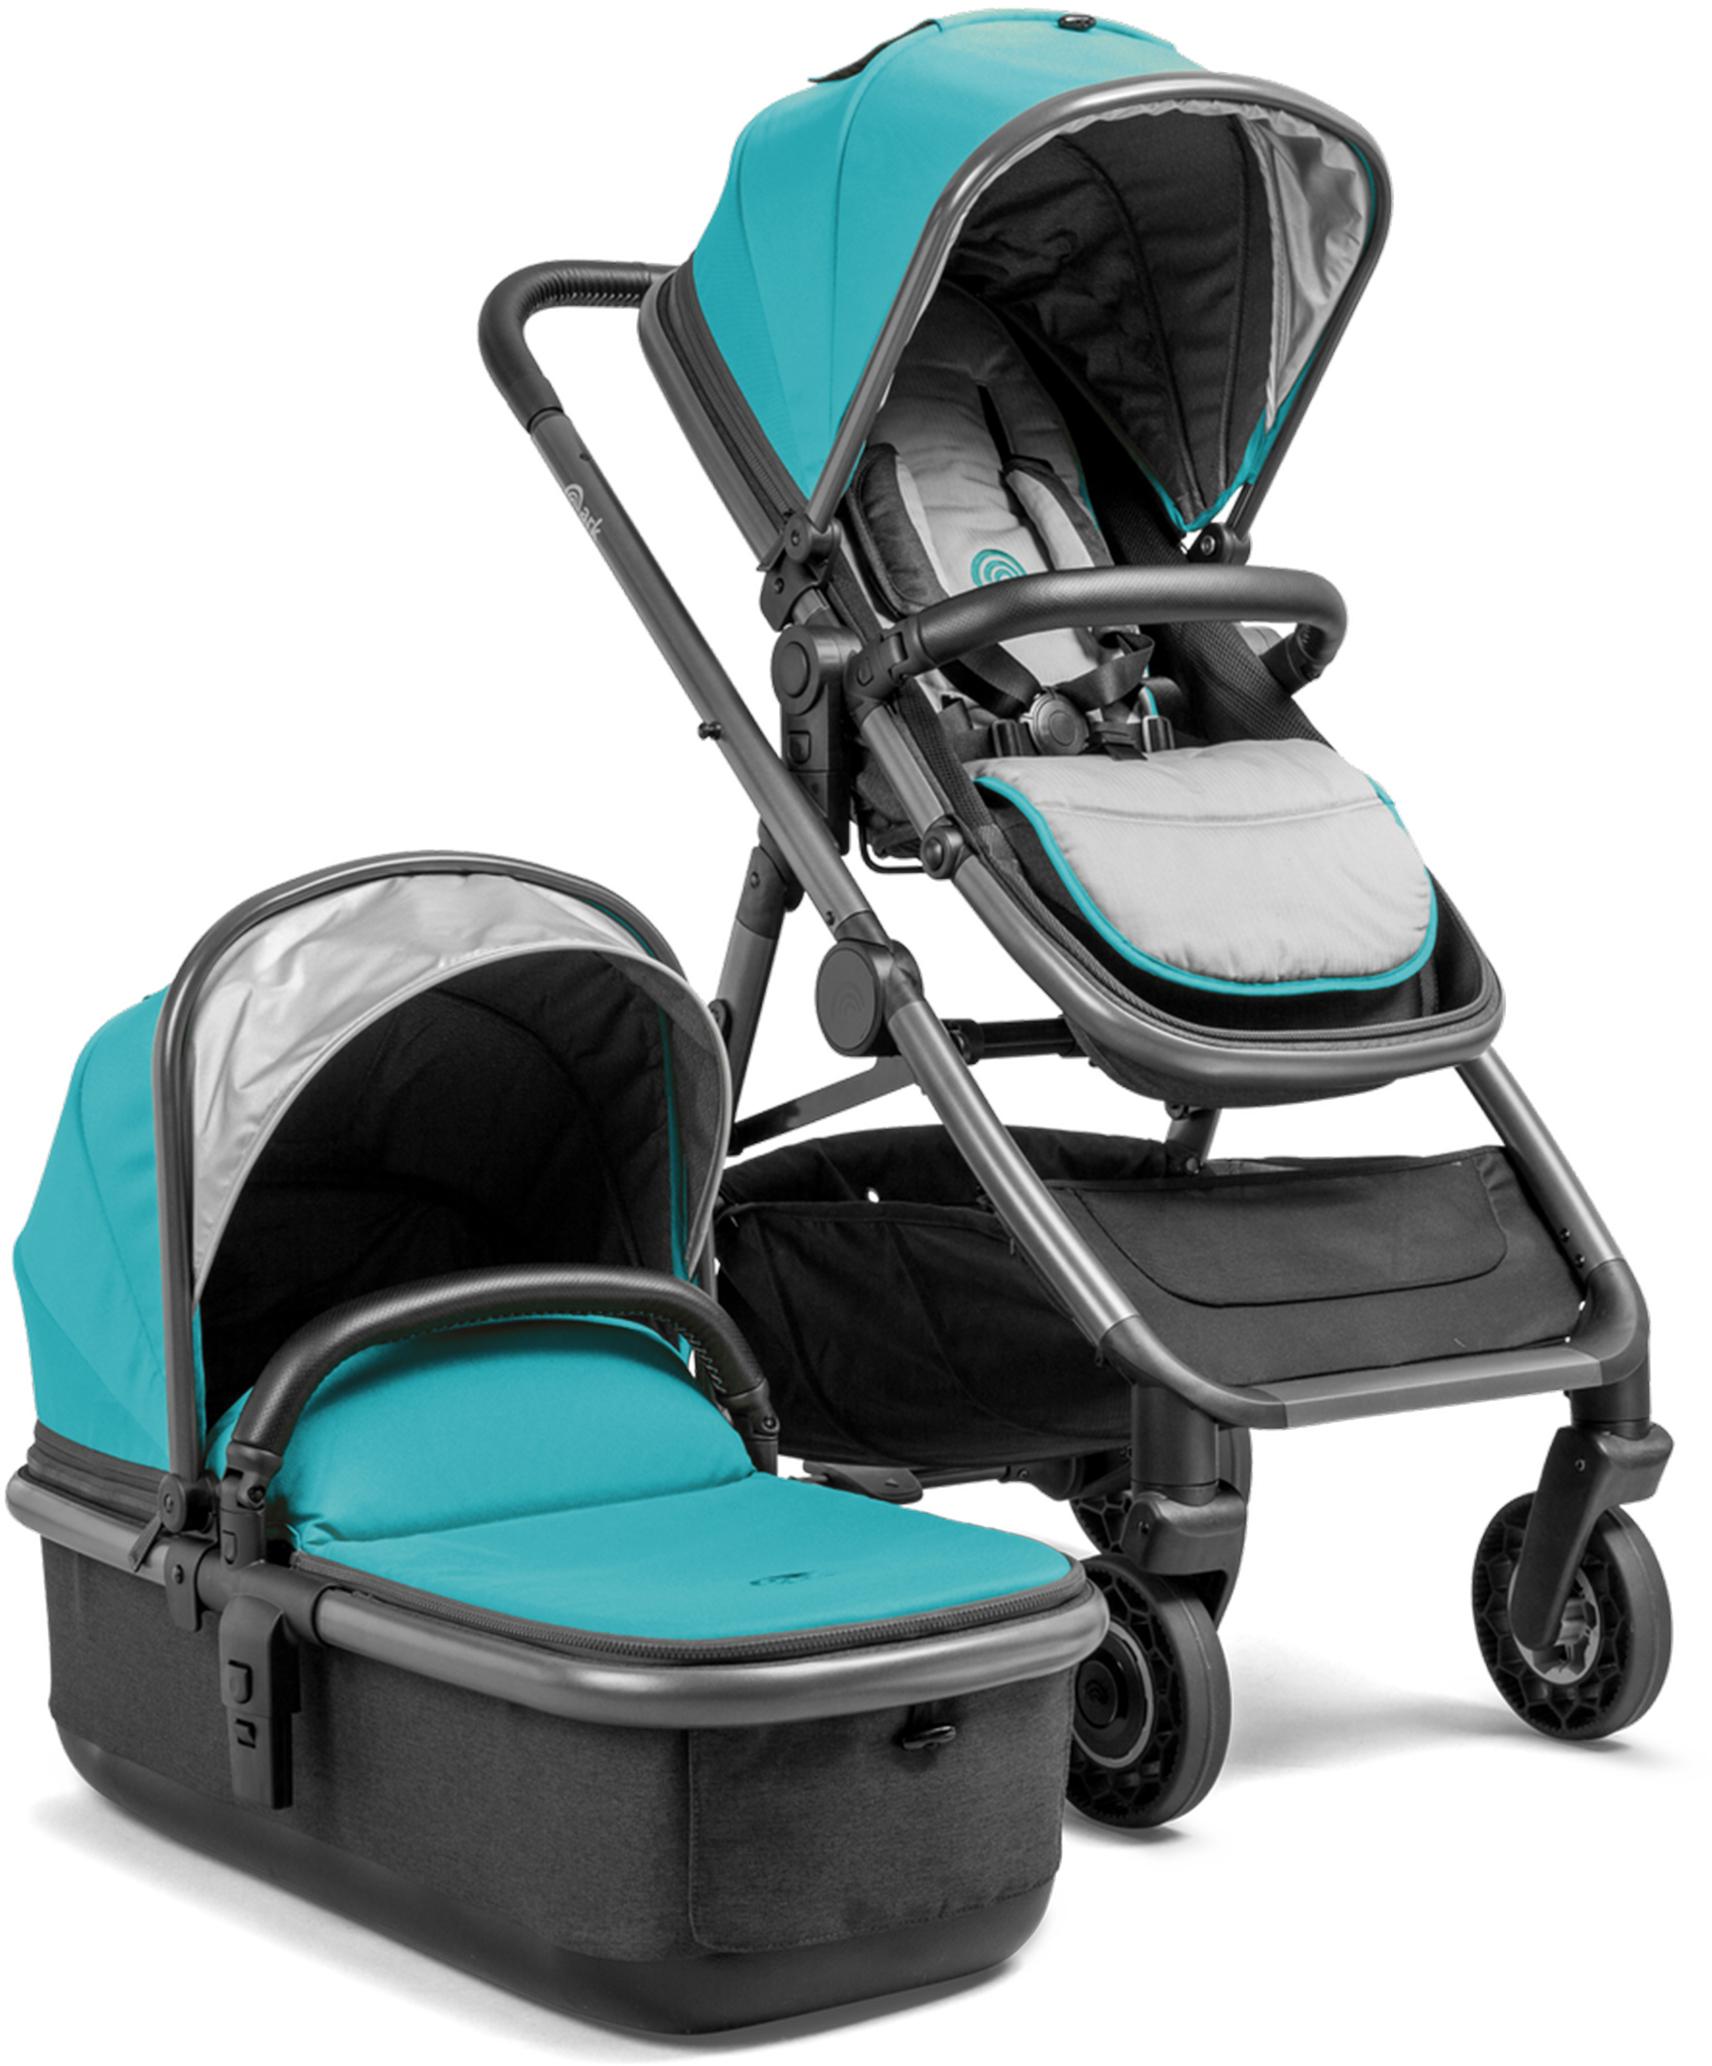 Ark 3-In-1 Travel System - Teal